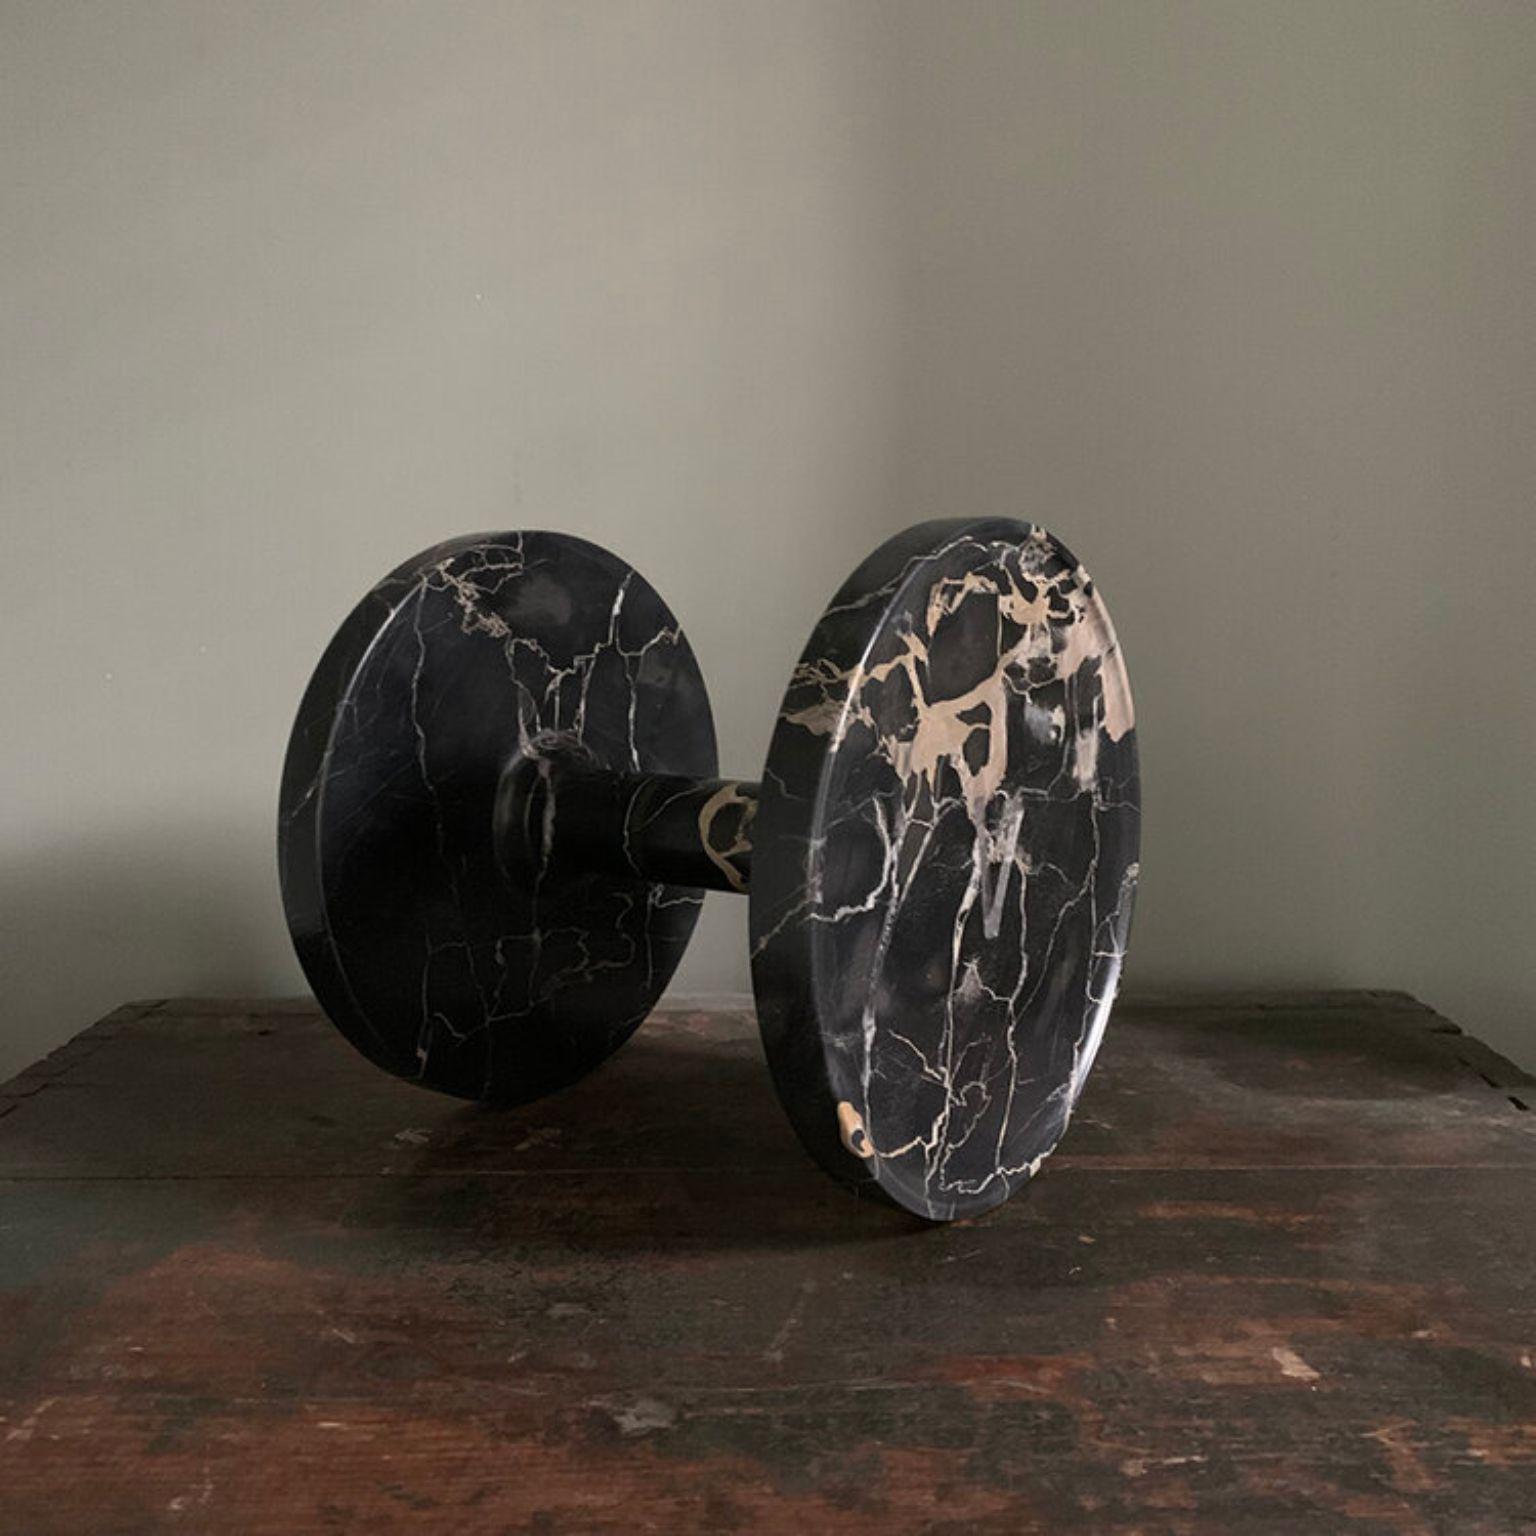 5 kg dumbbell by Pete Pongsak
2018
Materials: Portoro extra marble
Dimensions: diameter 22 x height 22 cm
Made in Italy

Hand craved from a single piece of stone.

ARCHIVE & ARCHIVE Studio specializes in creating functional sculptures and